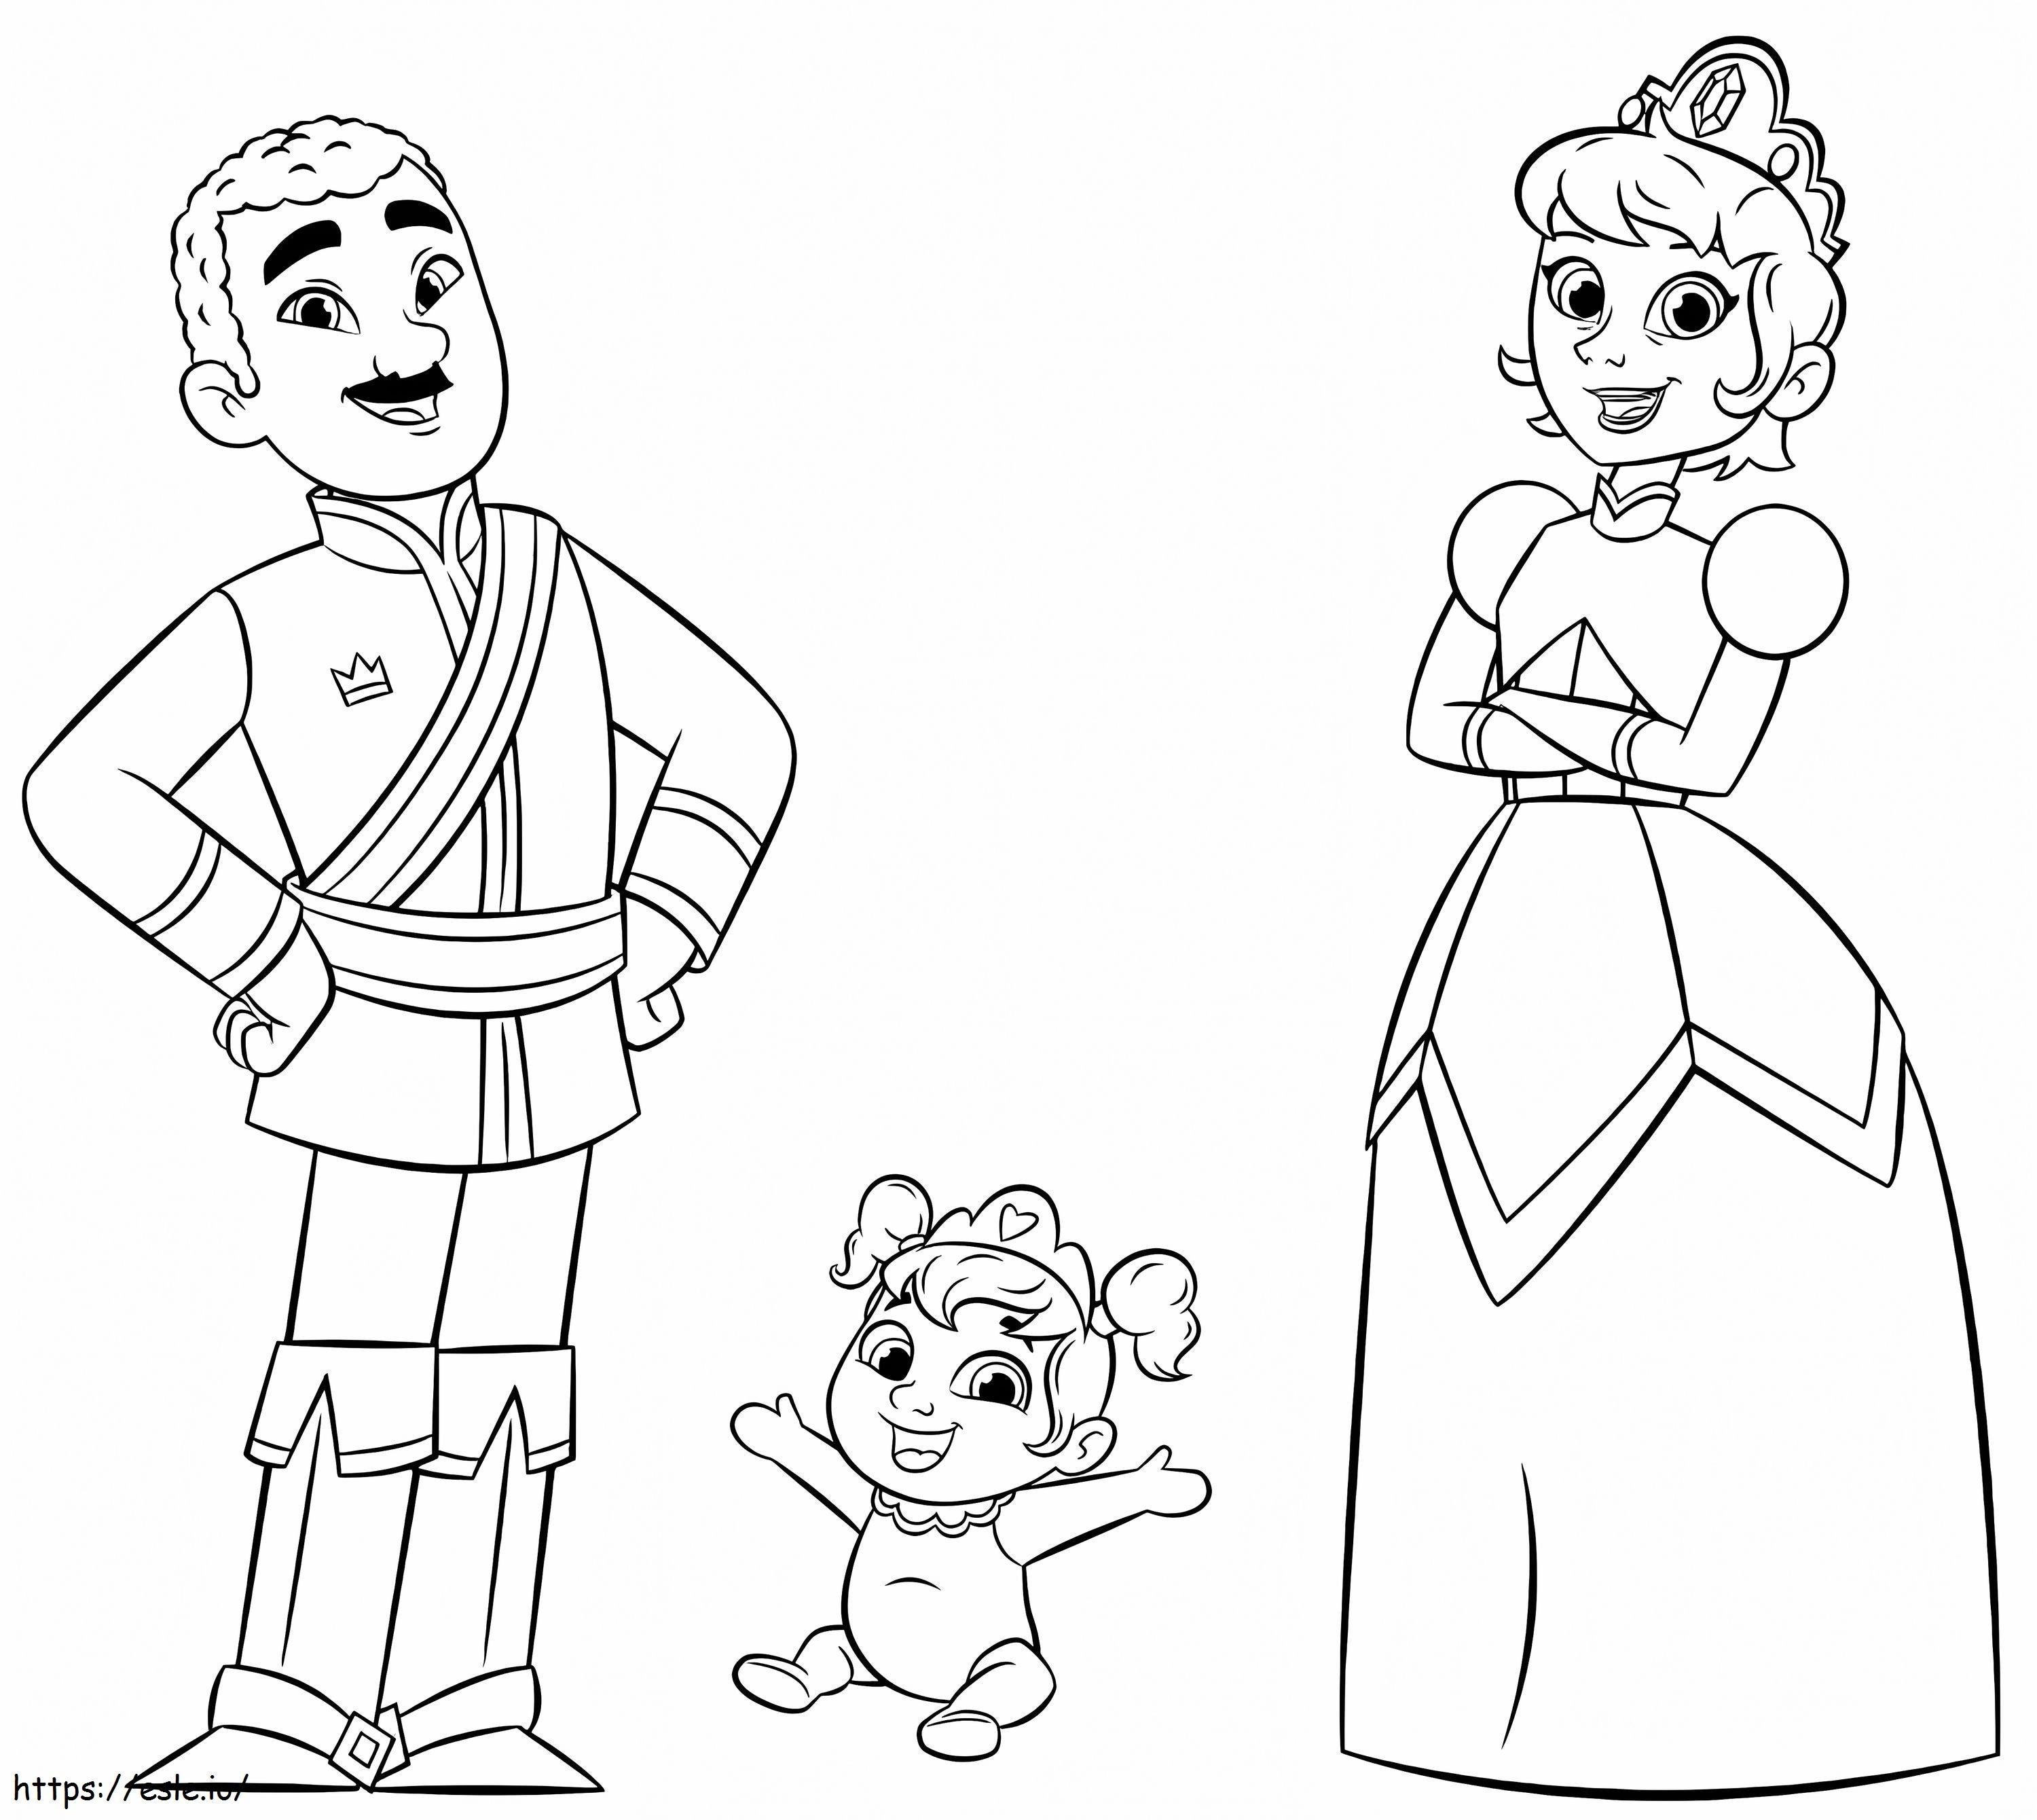 In The Family coloring page